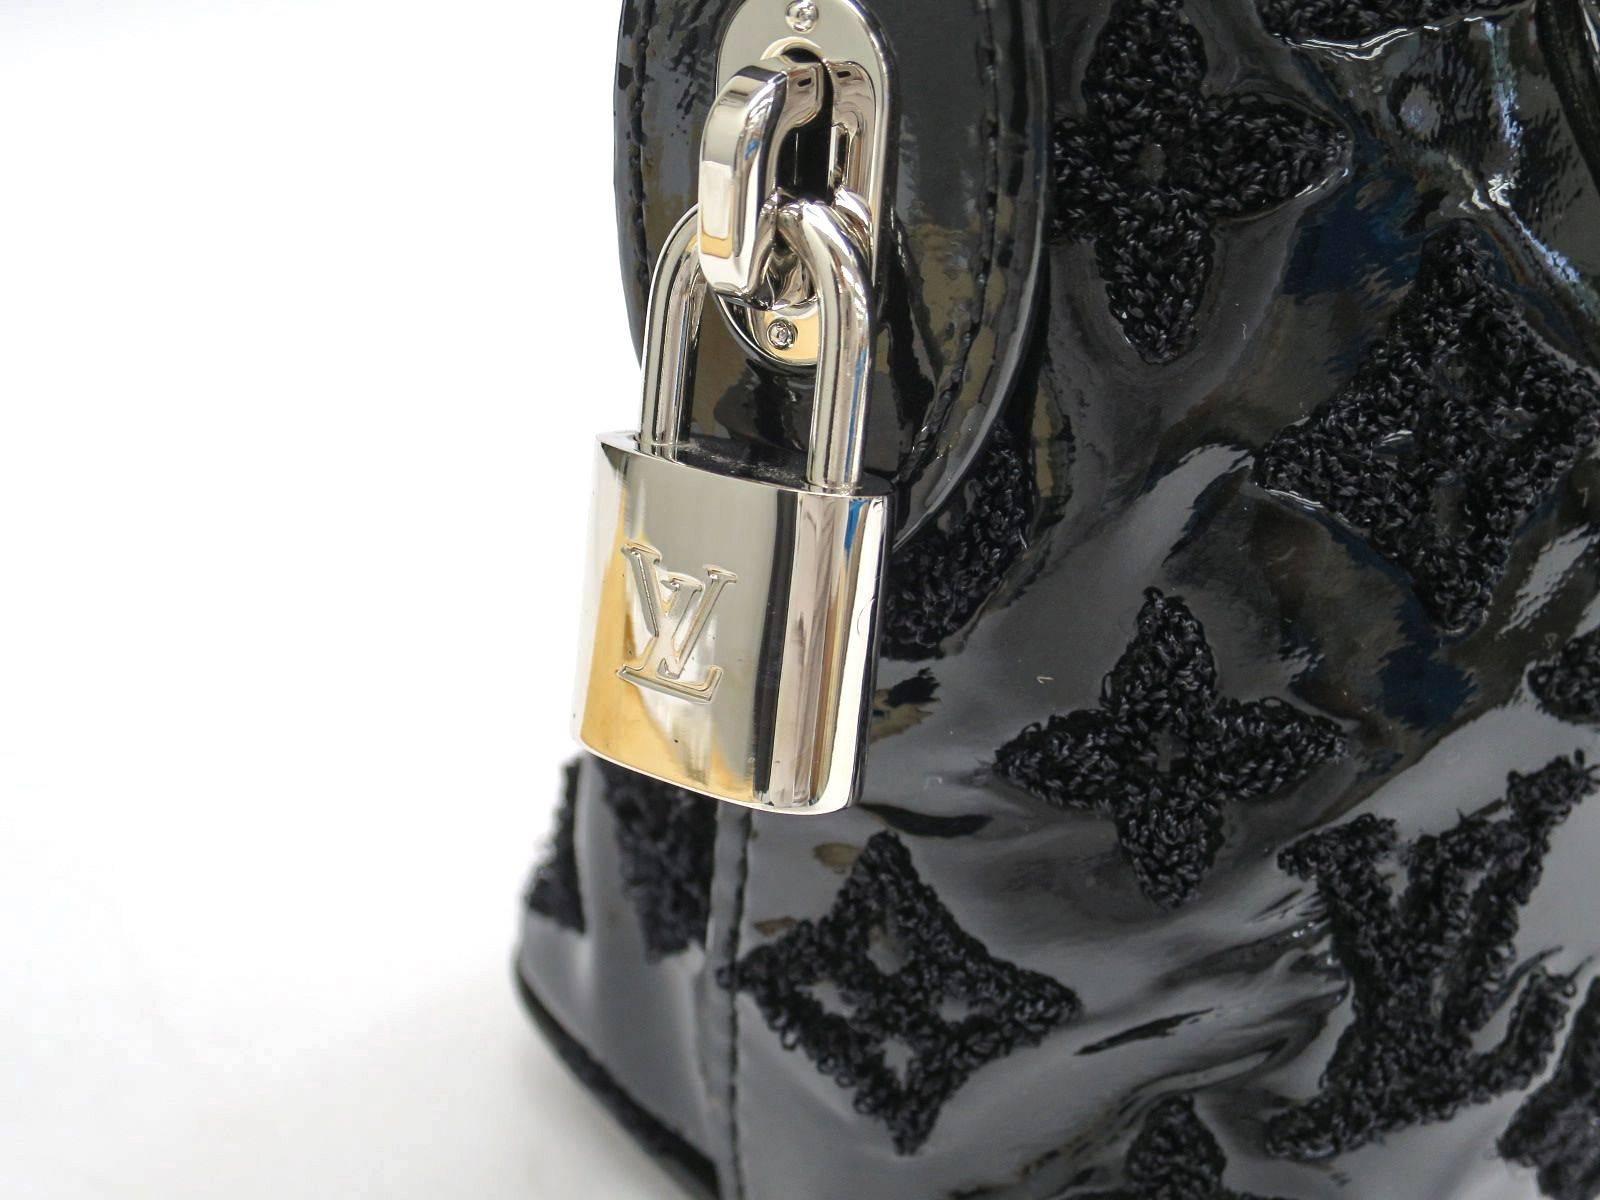 CURATOR'S NOTES

Vernis patent leather
Silver hardware
Zipper closure
Made in France
Date code TJ3142
Handle 11